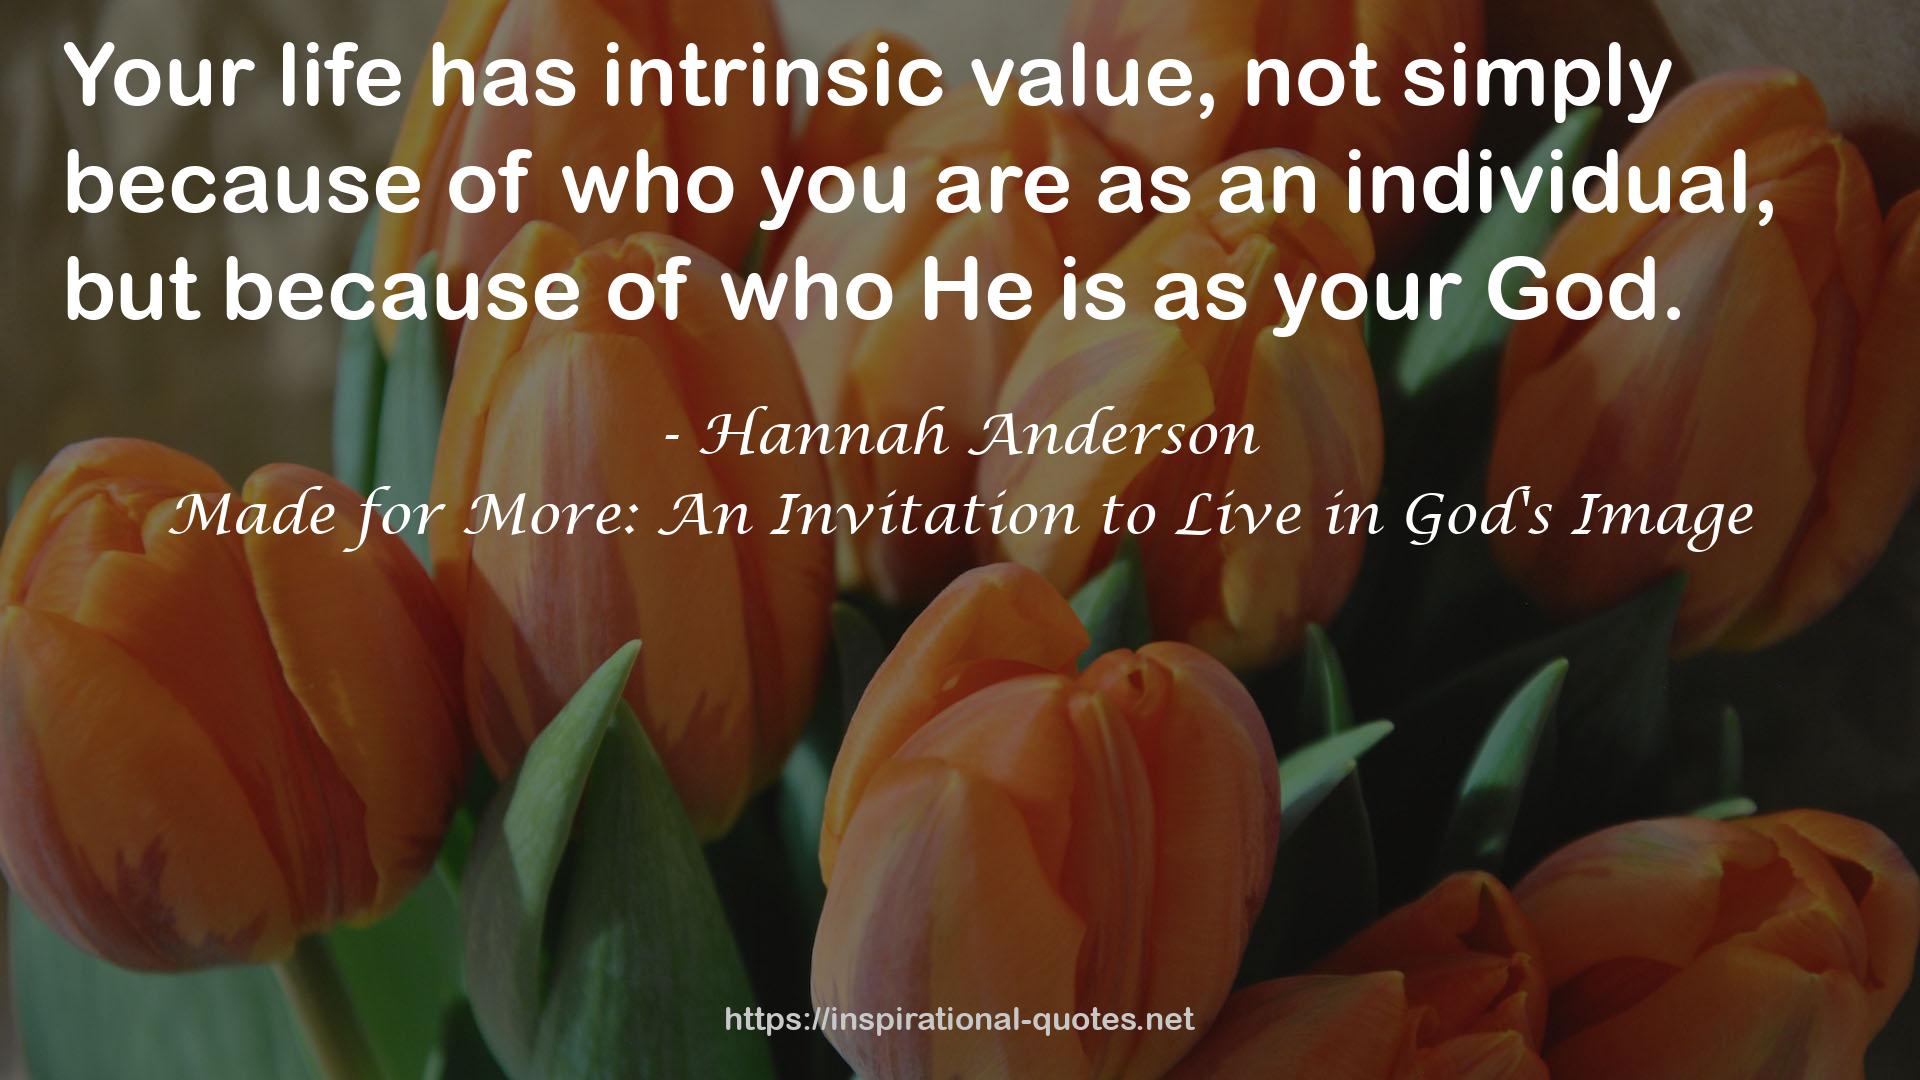 Made for More: An Invitation to Live in God's Image QUOTES